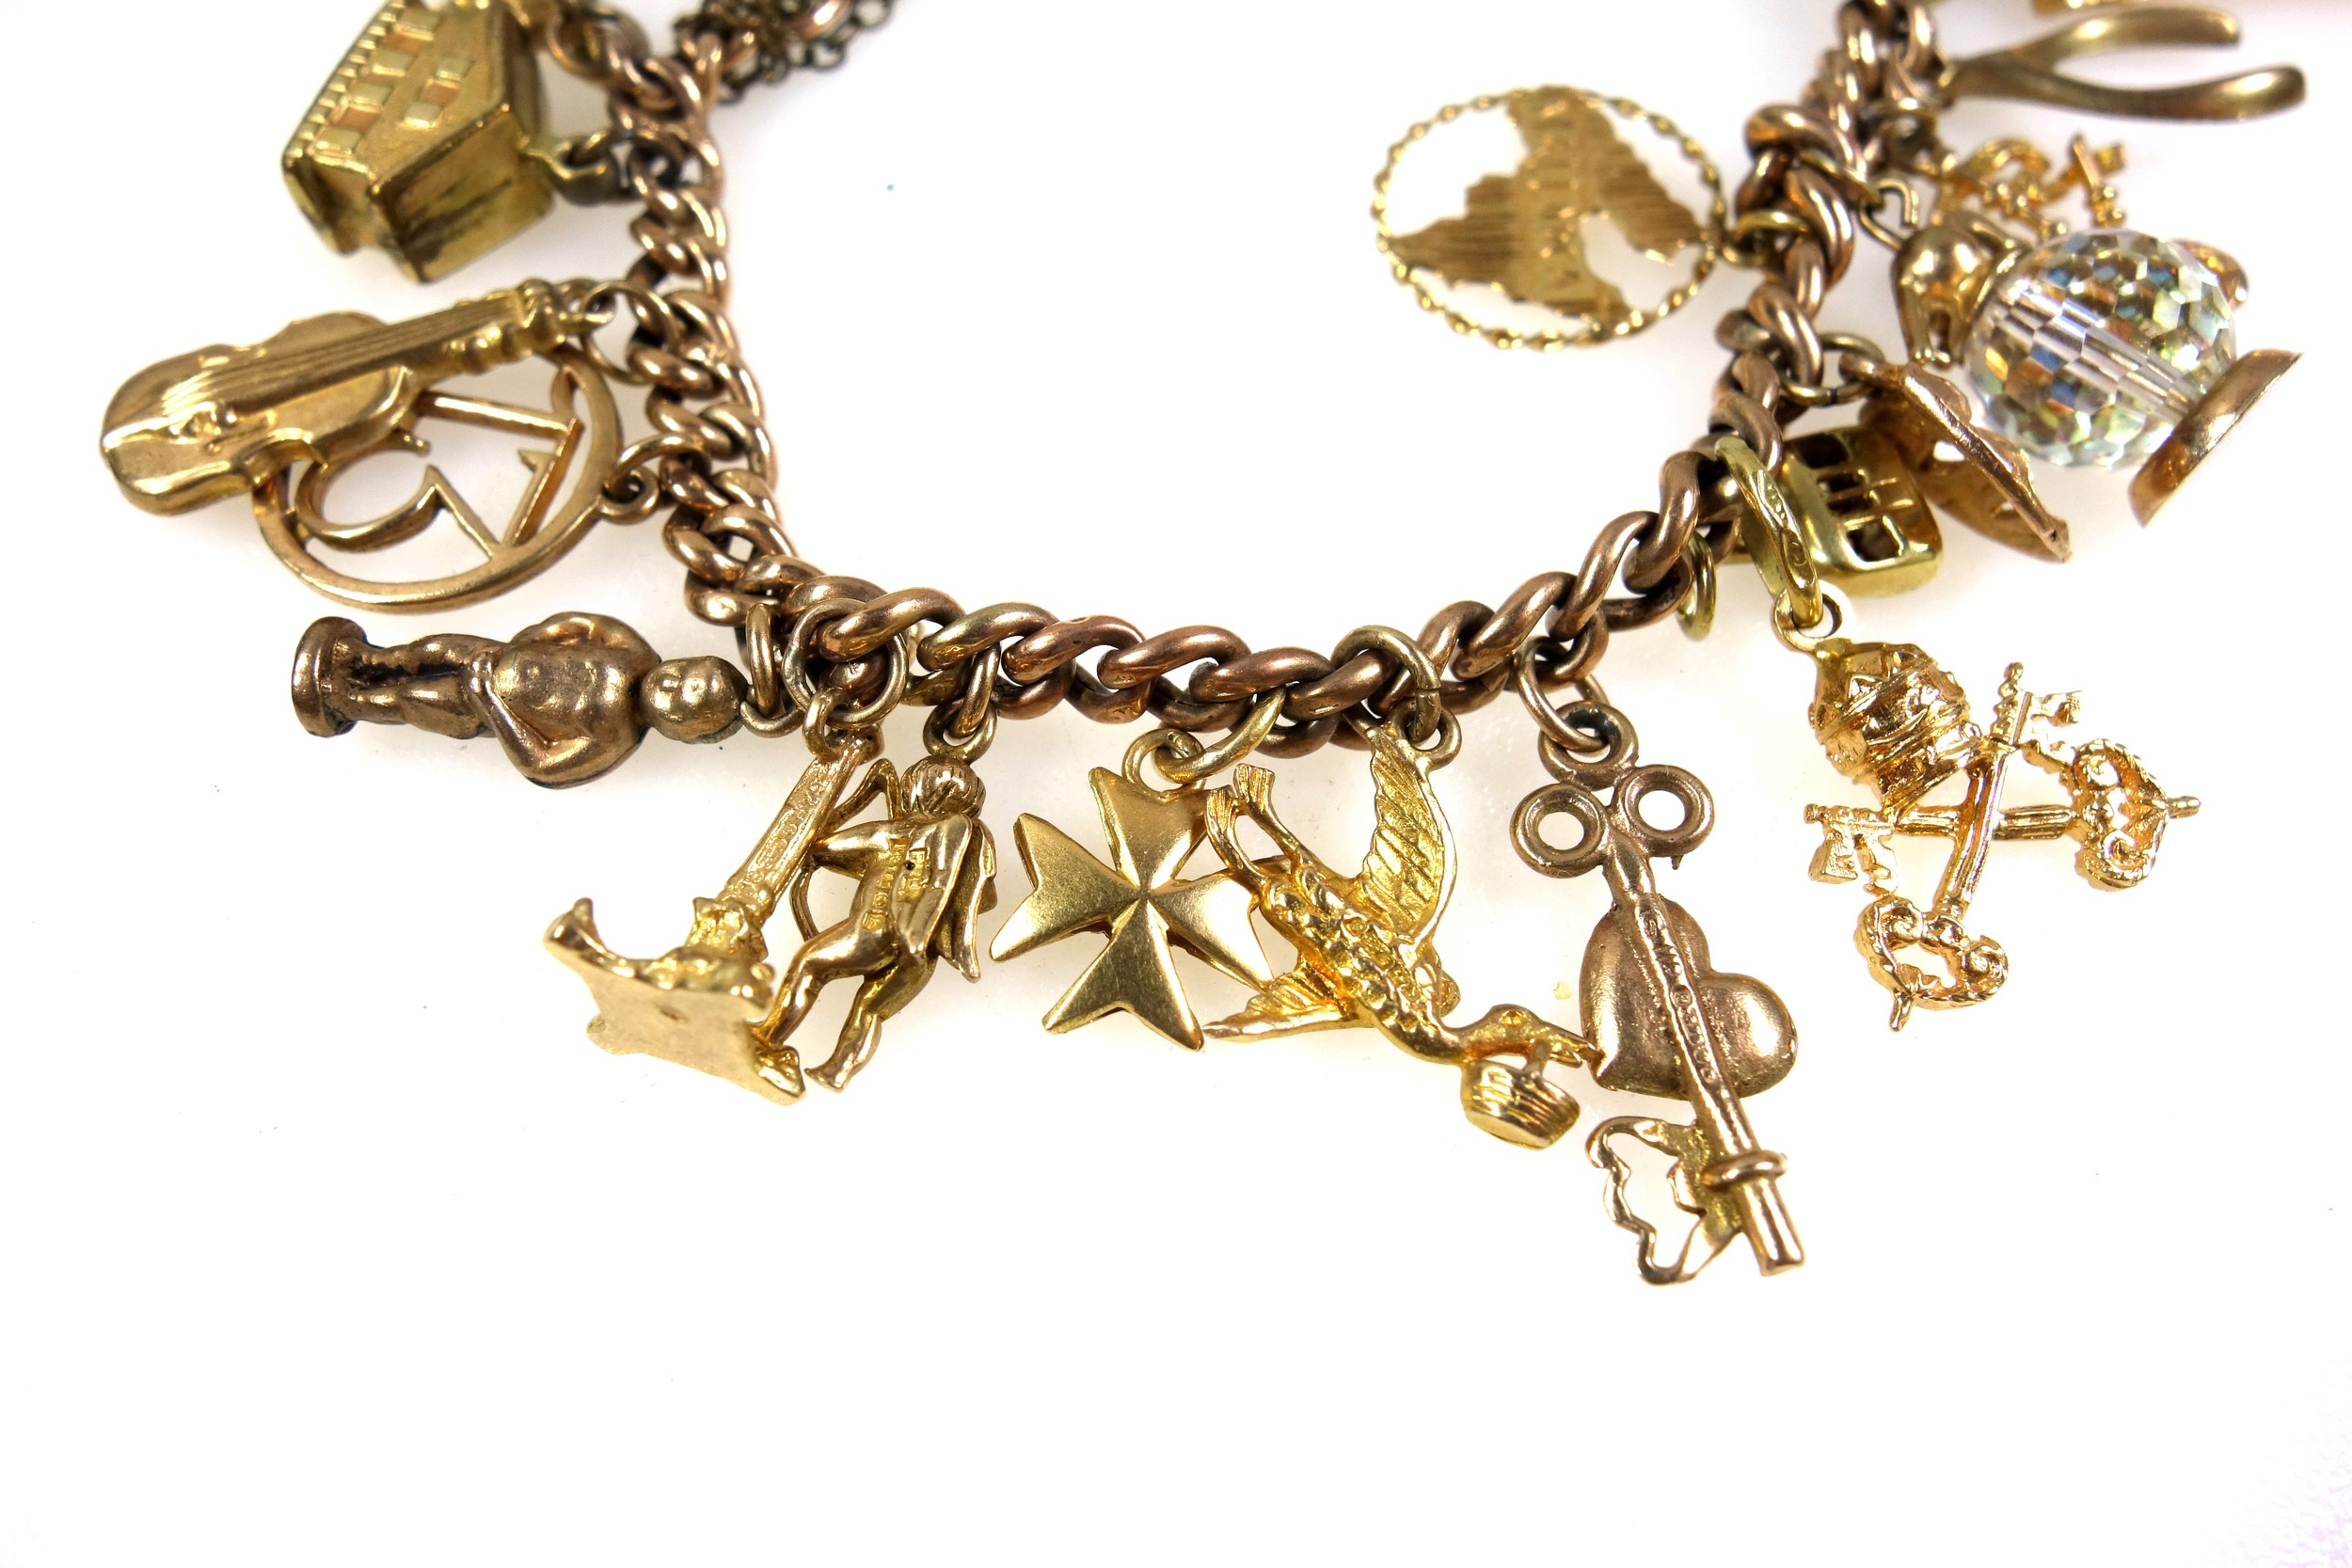 9ct gold charm bracelet with 27 charms, gross weight 44.2 grams - Image 3 of 5